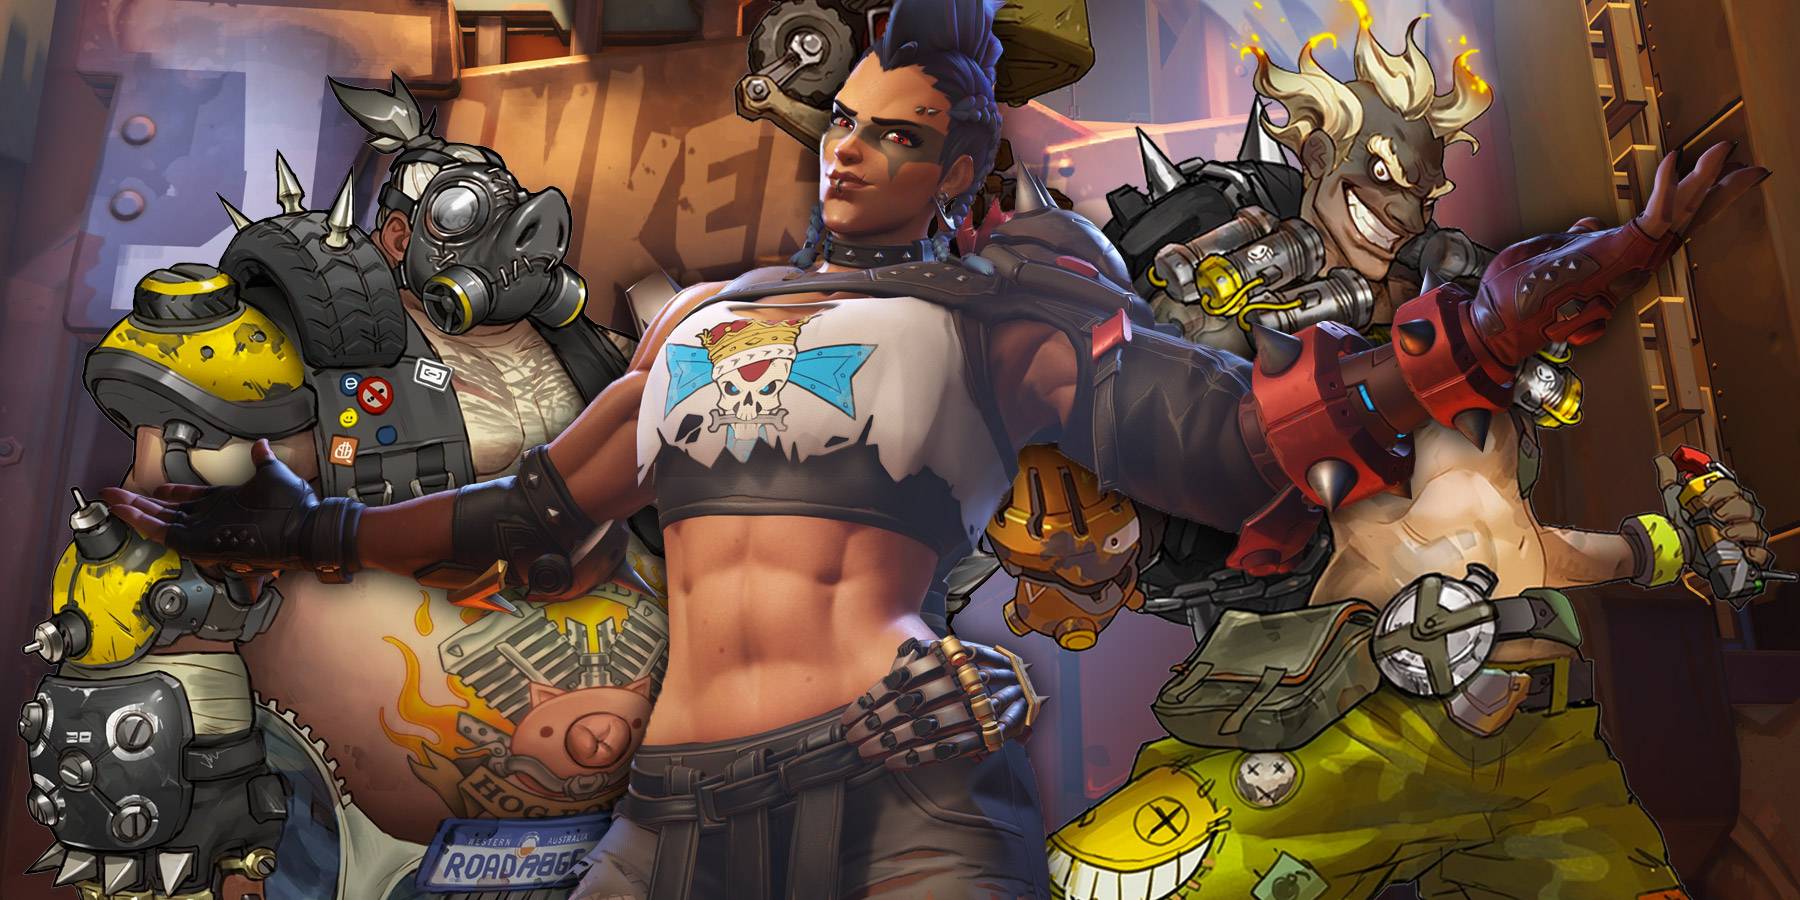 Are junkrat and roadhog a couple